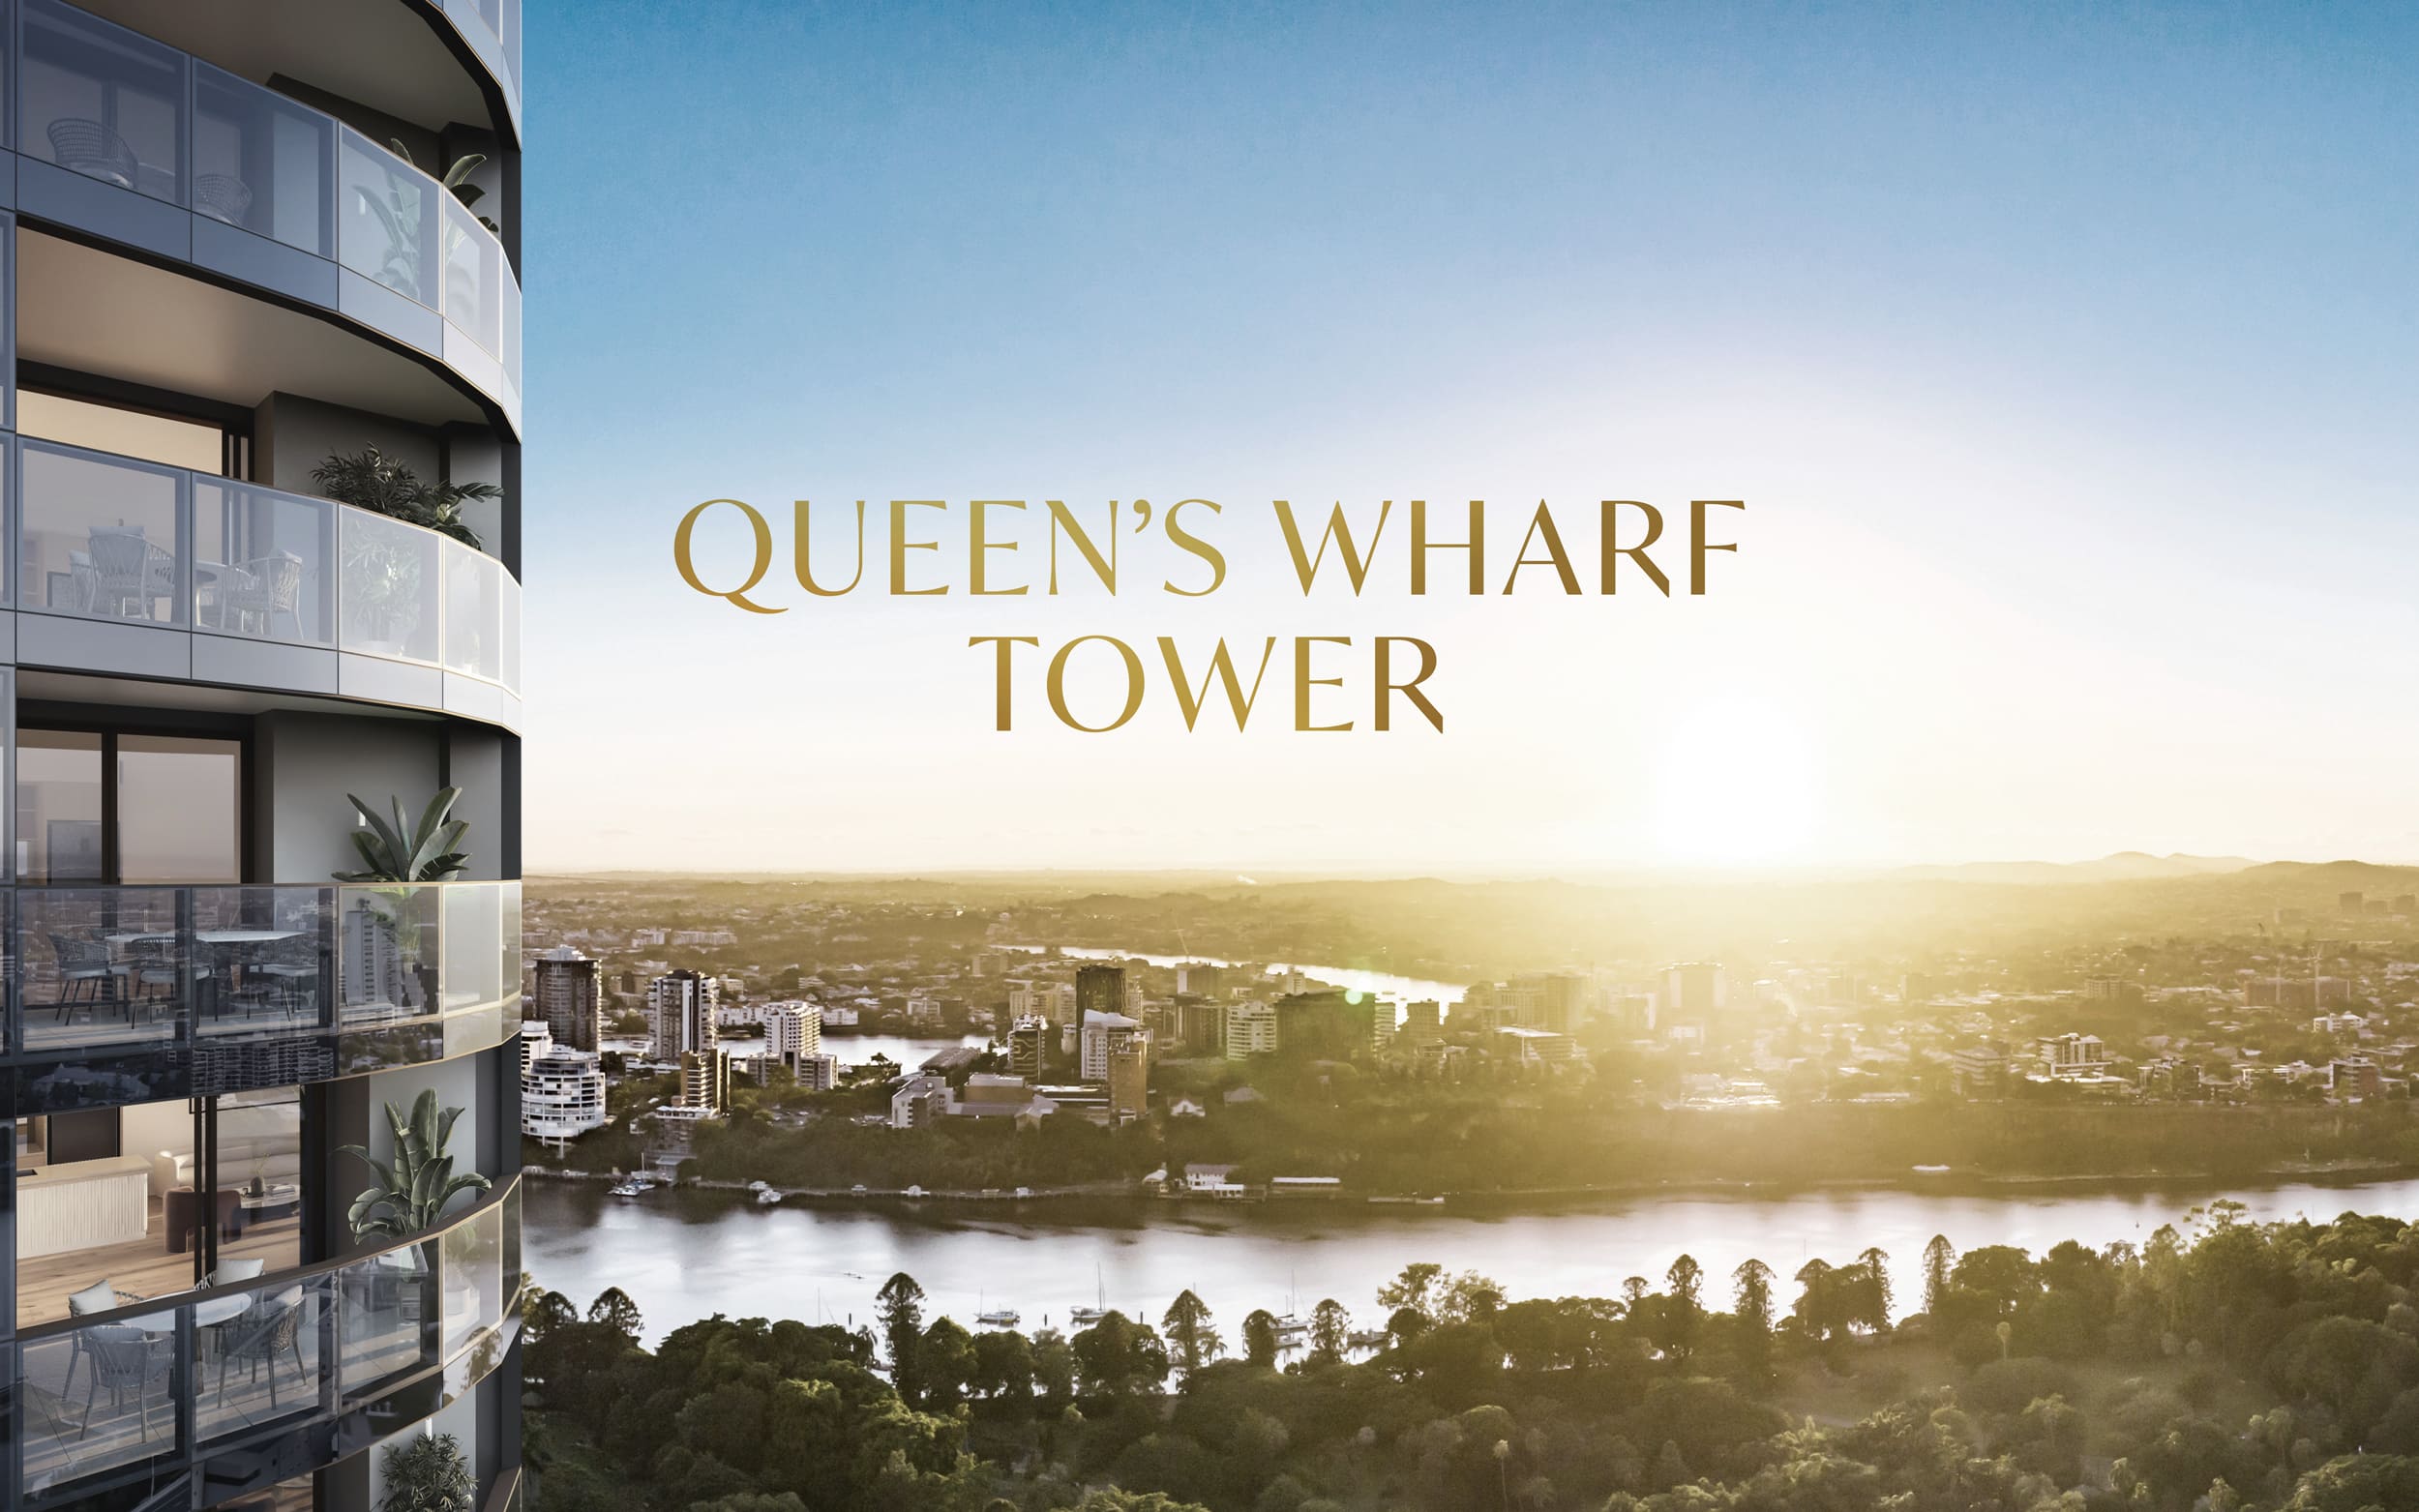 Queen's Wharf Tower logo on image of the tower and Brisbane